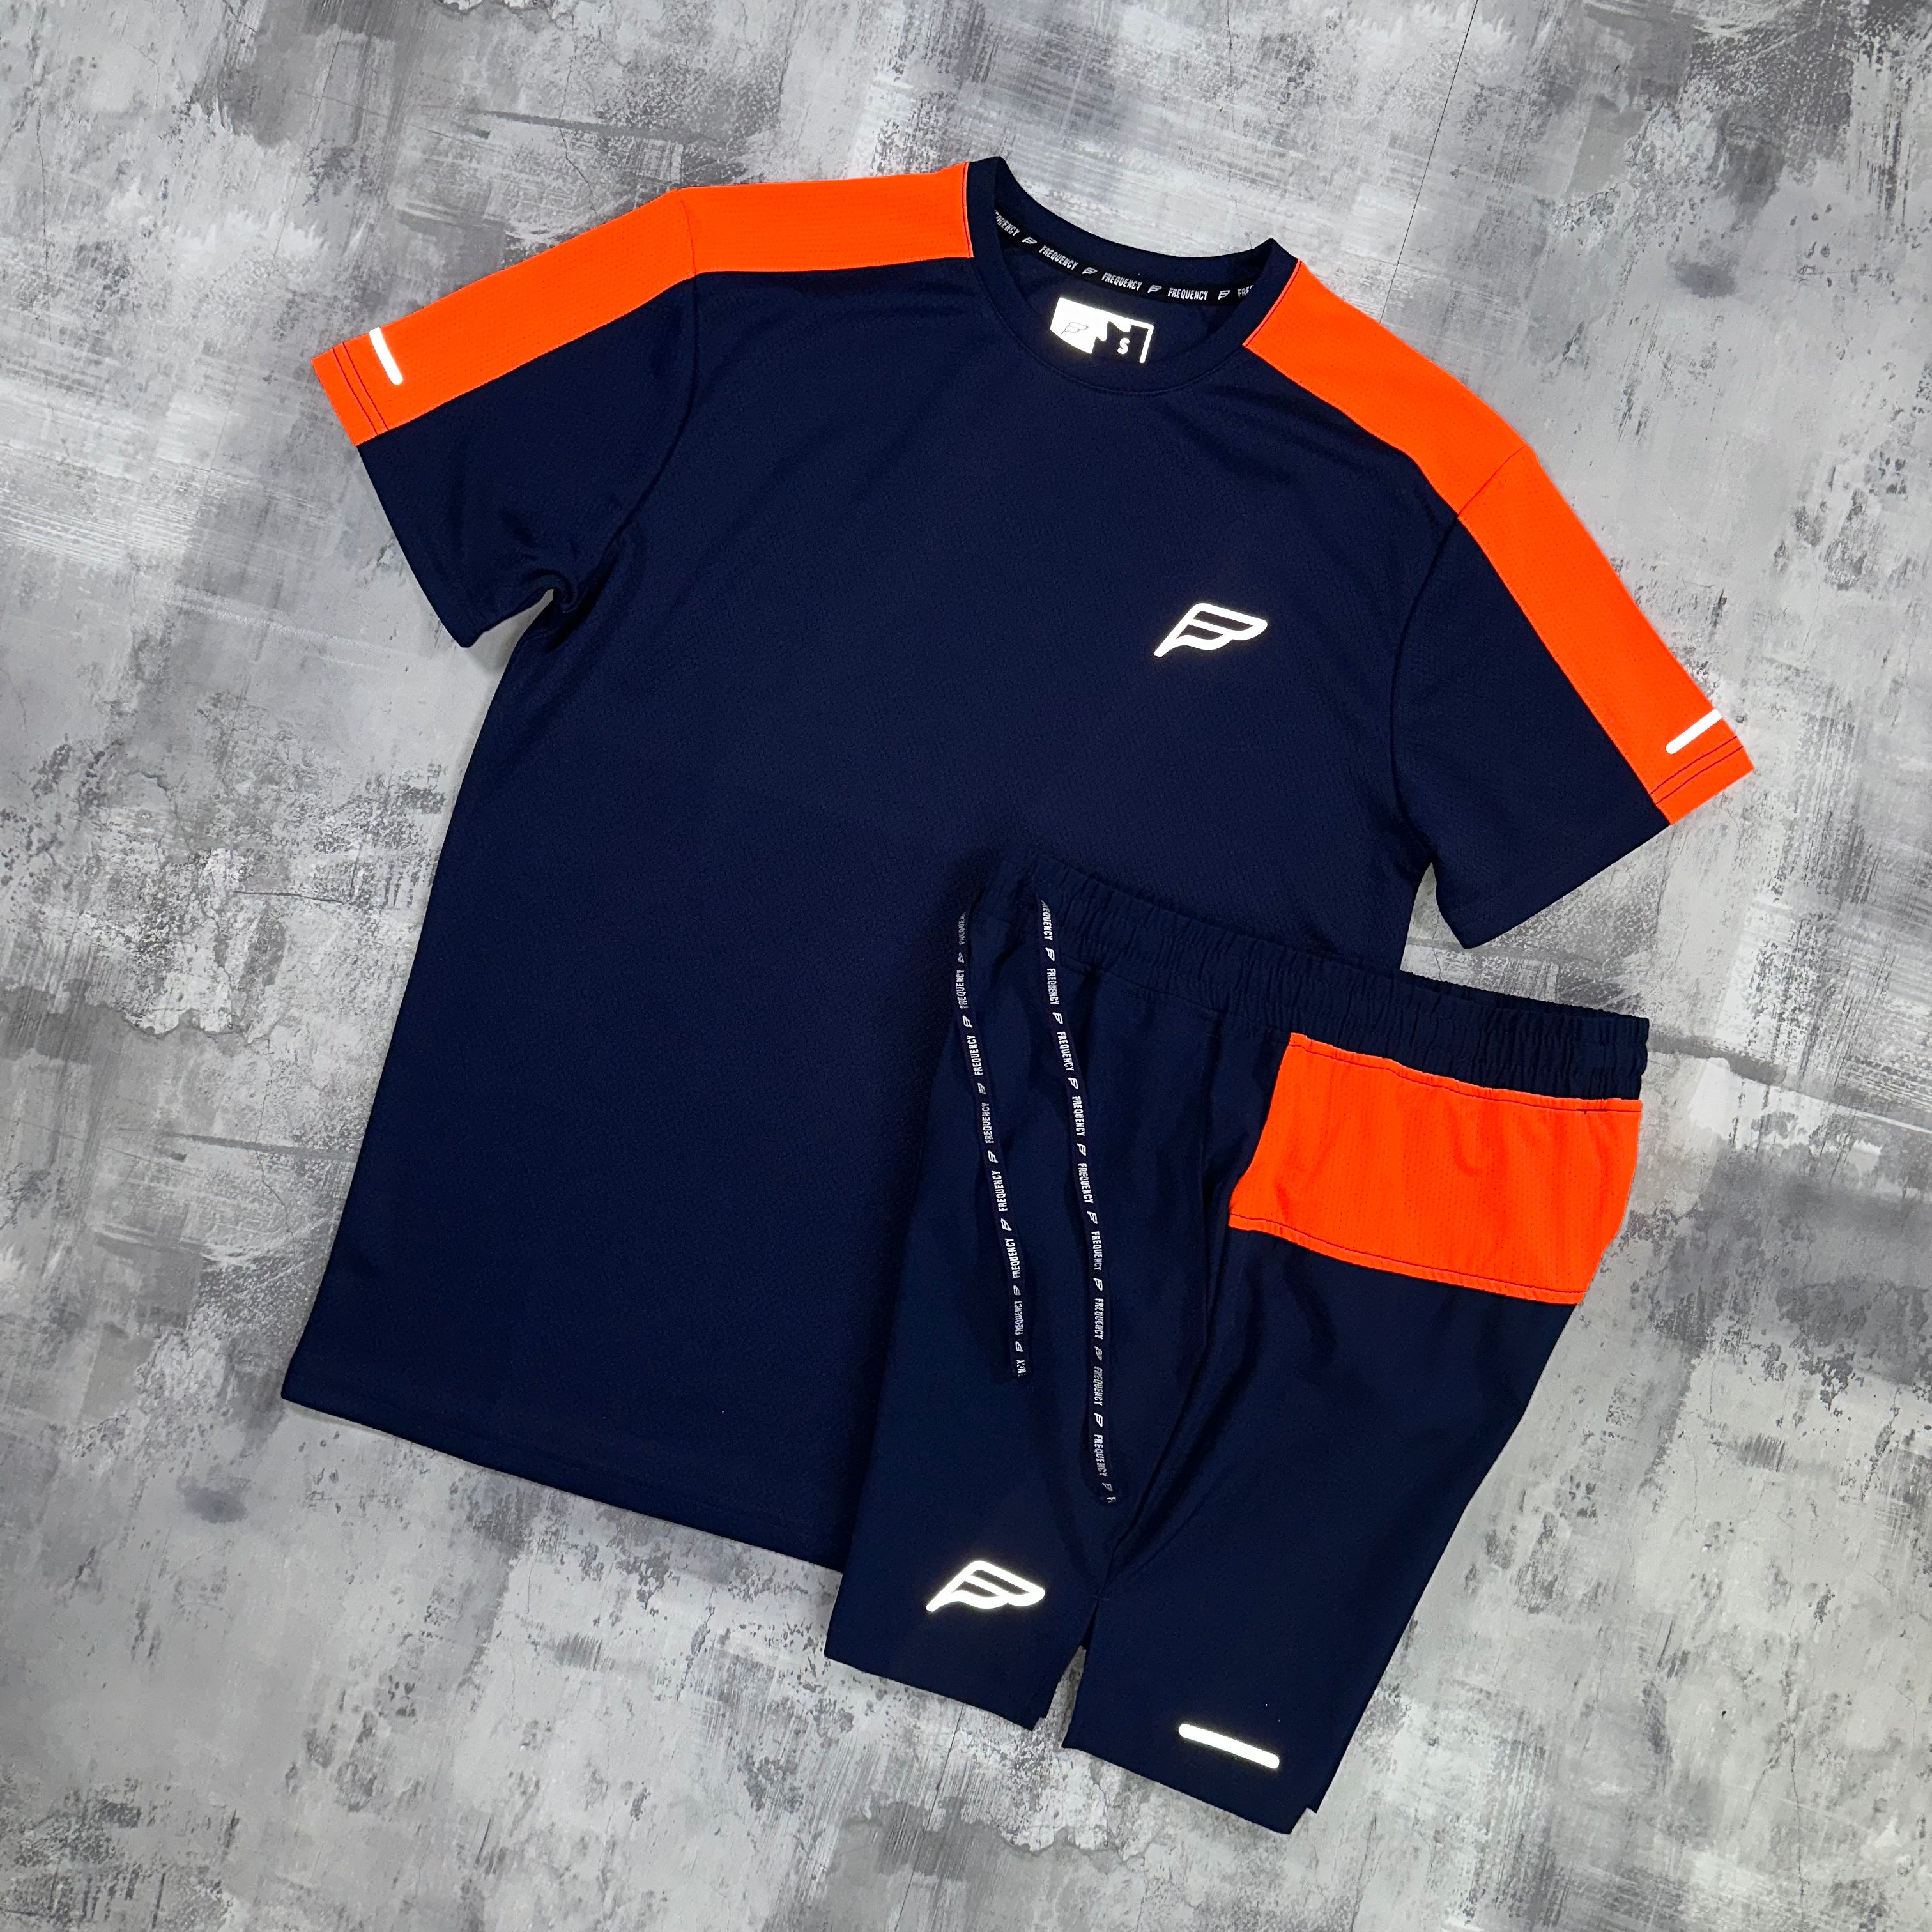 Frequency Perform Pro set Navy - T-shirt & Shorts